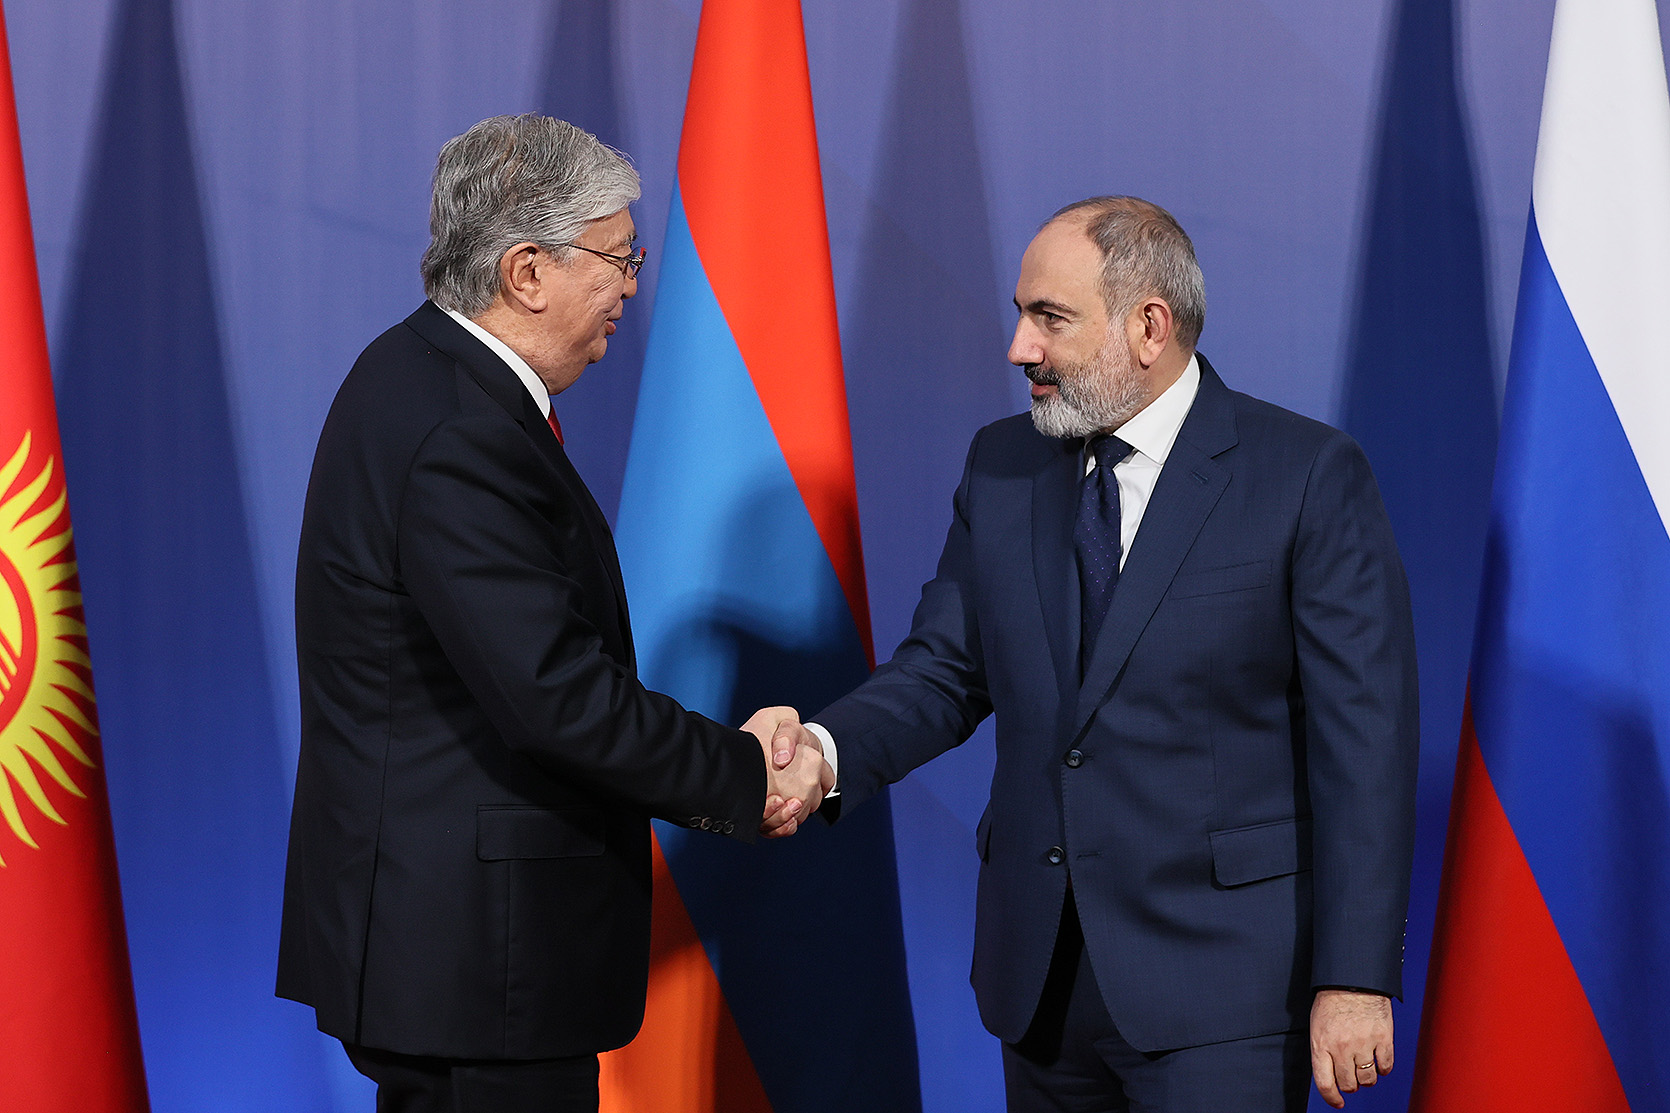 Sputnik-Armenia” news agency: CSTO countries will stop together ominous  trends in the international stage - Secretary General of the Organization